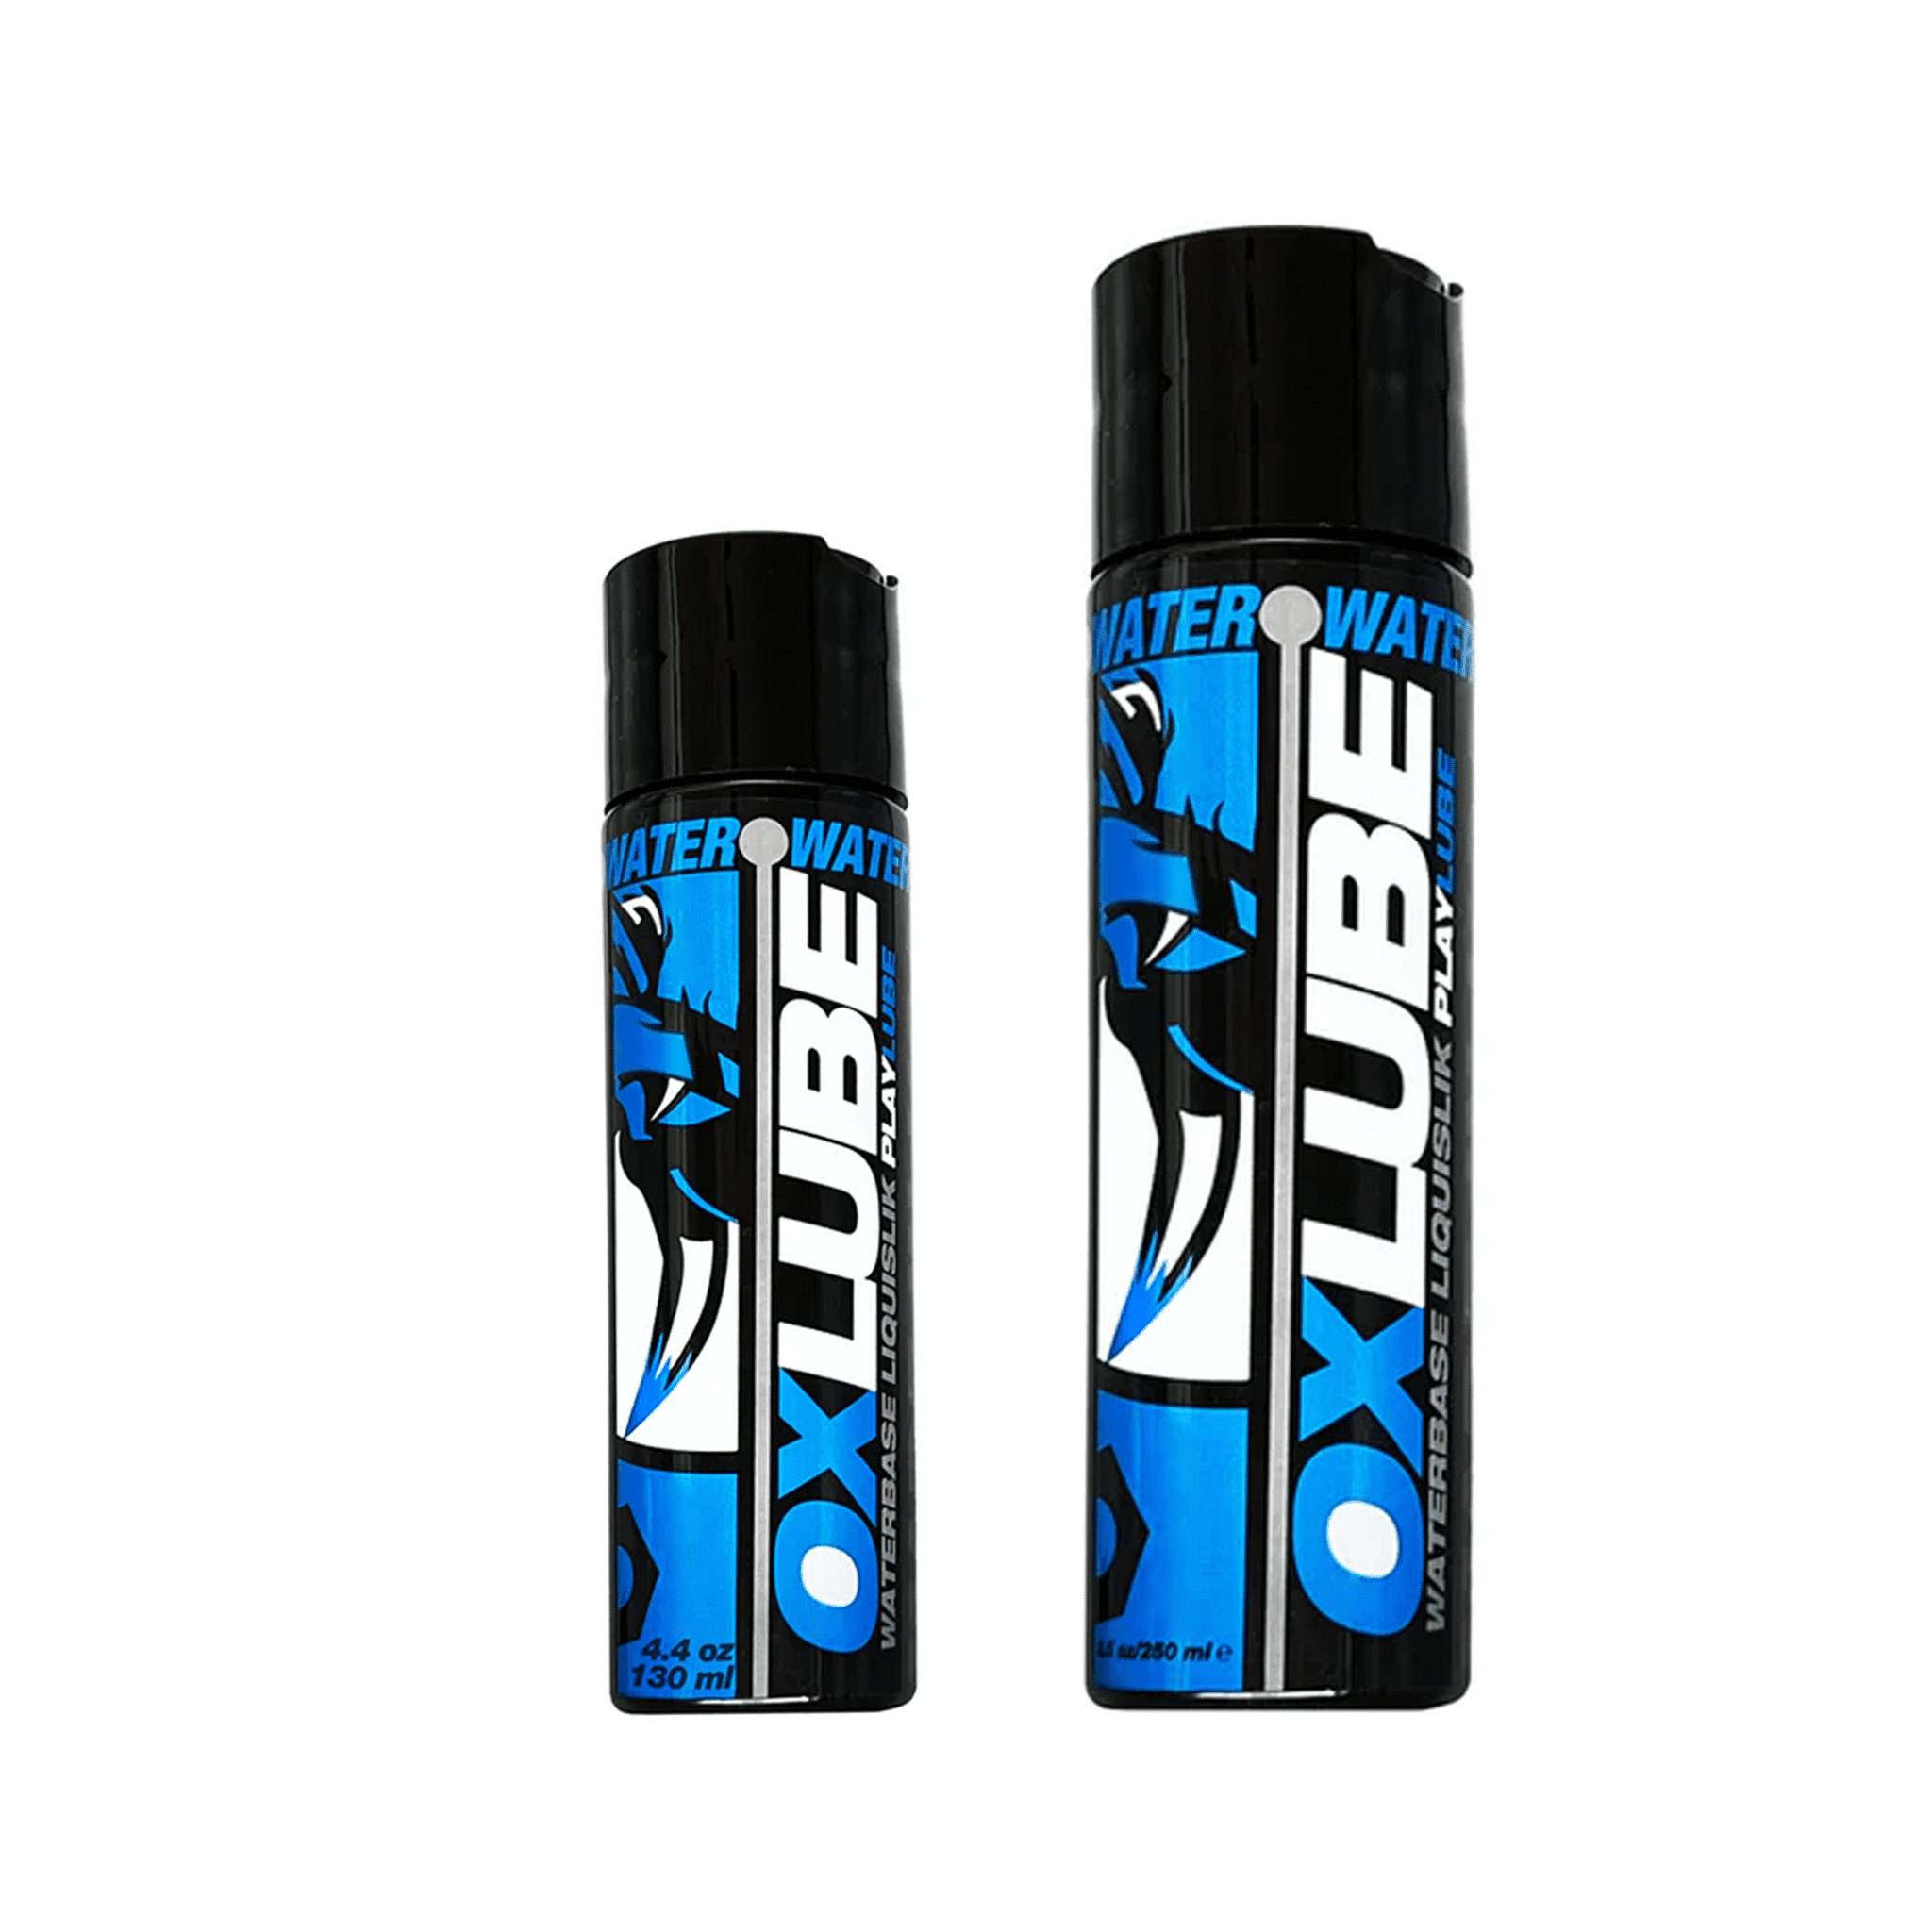 OxLube Water-based Personal Lubricant by OxBalls - CheapLubes.com